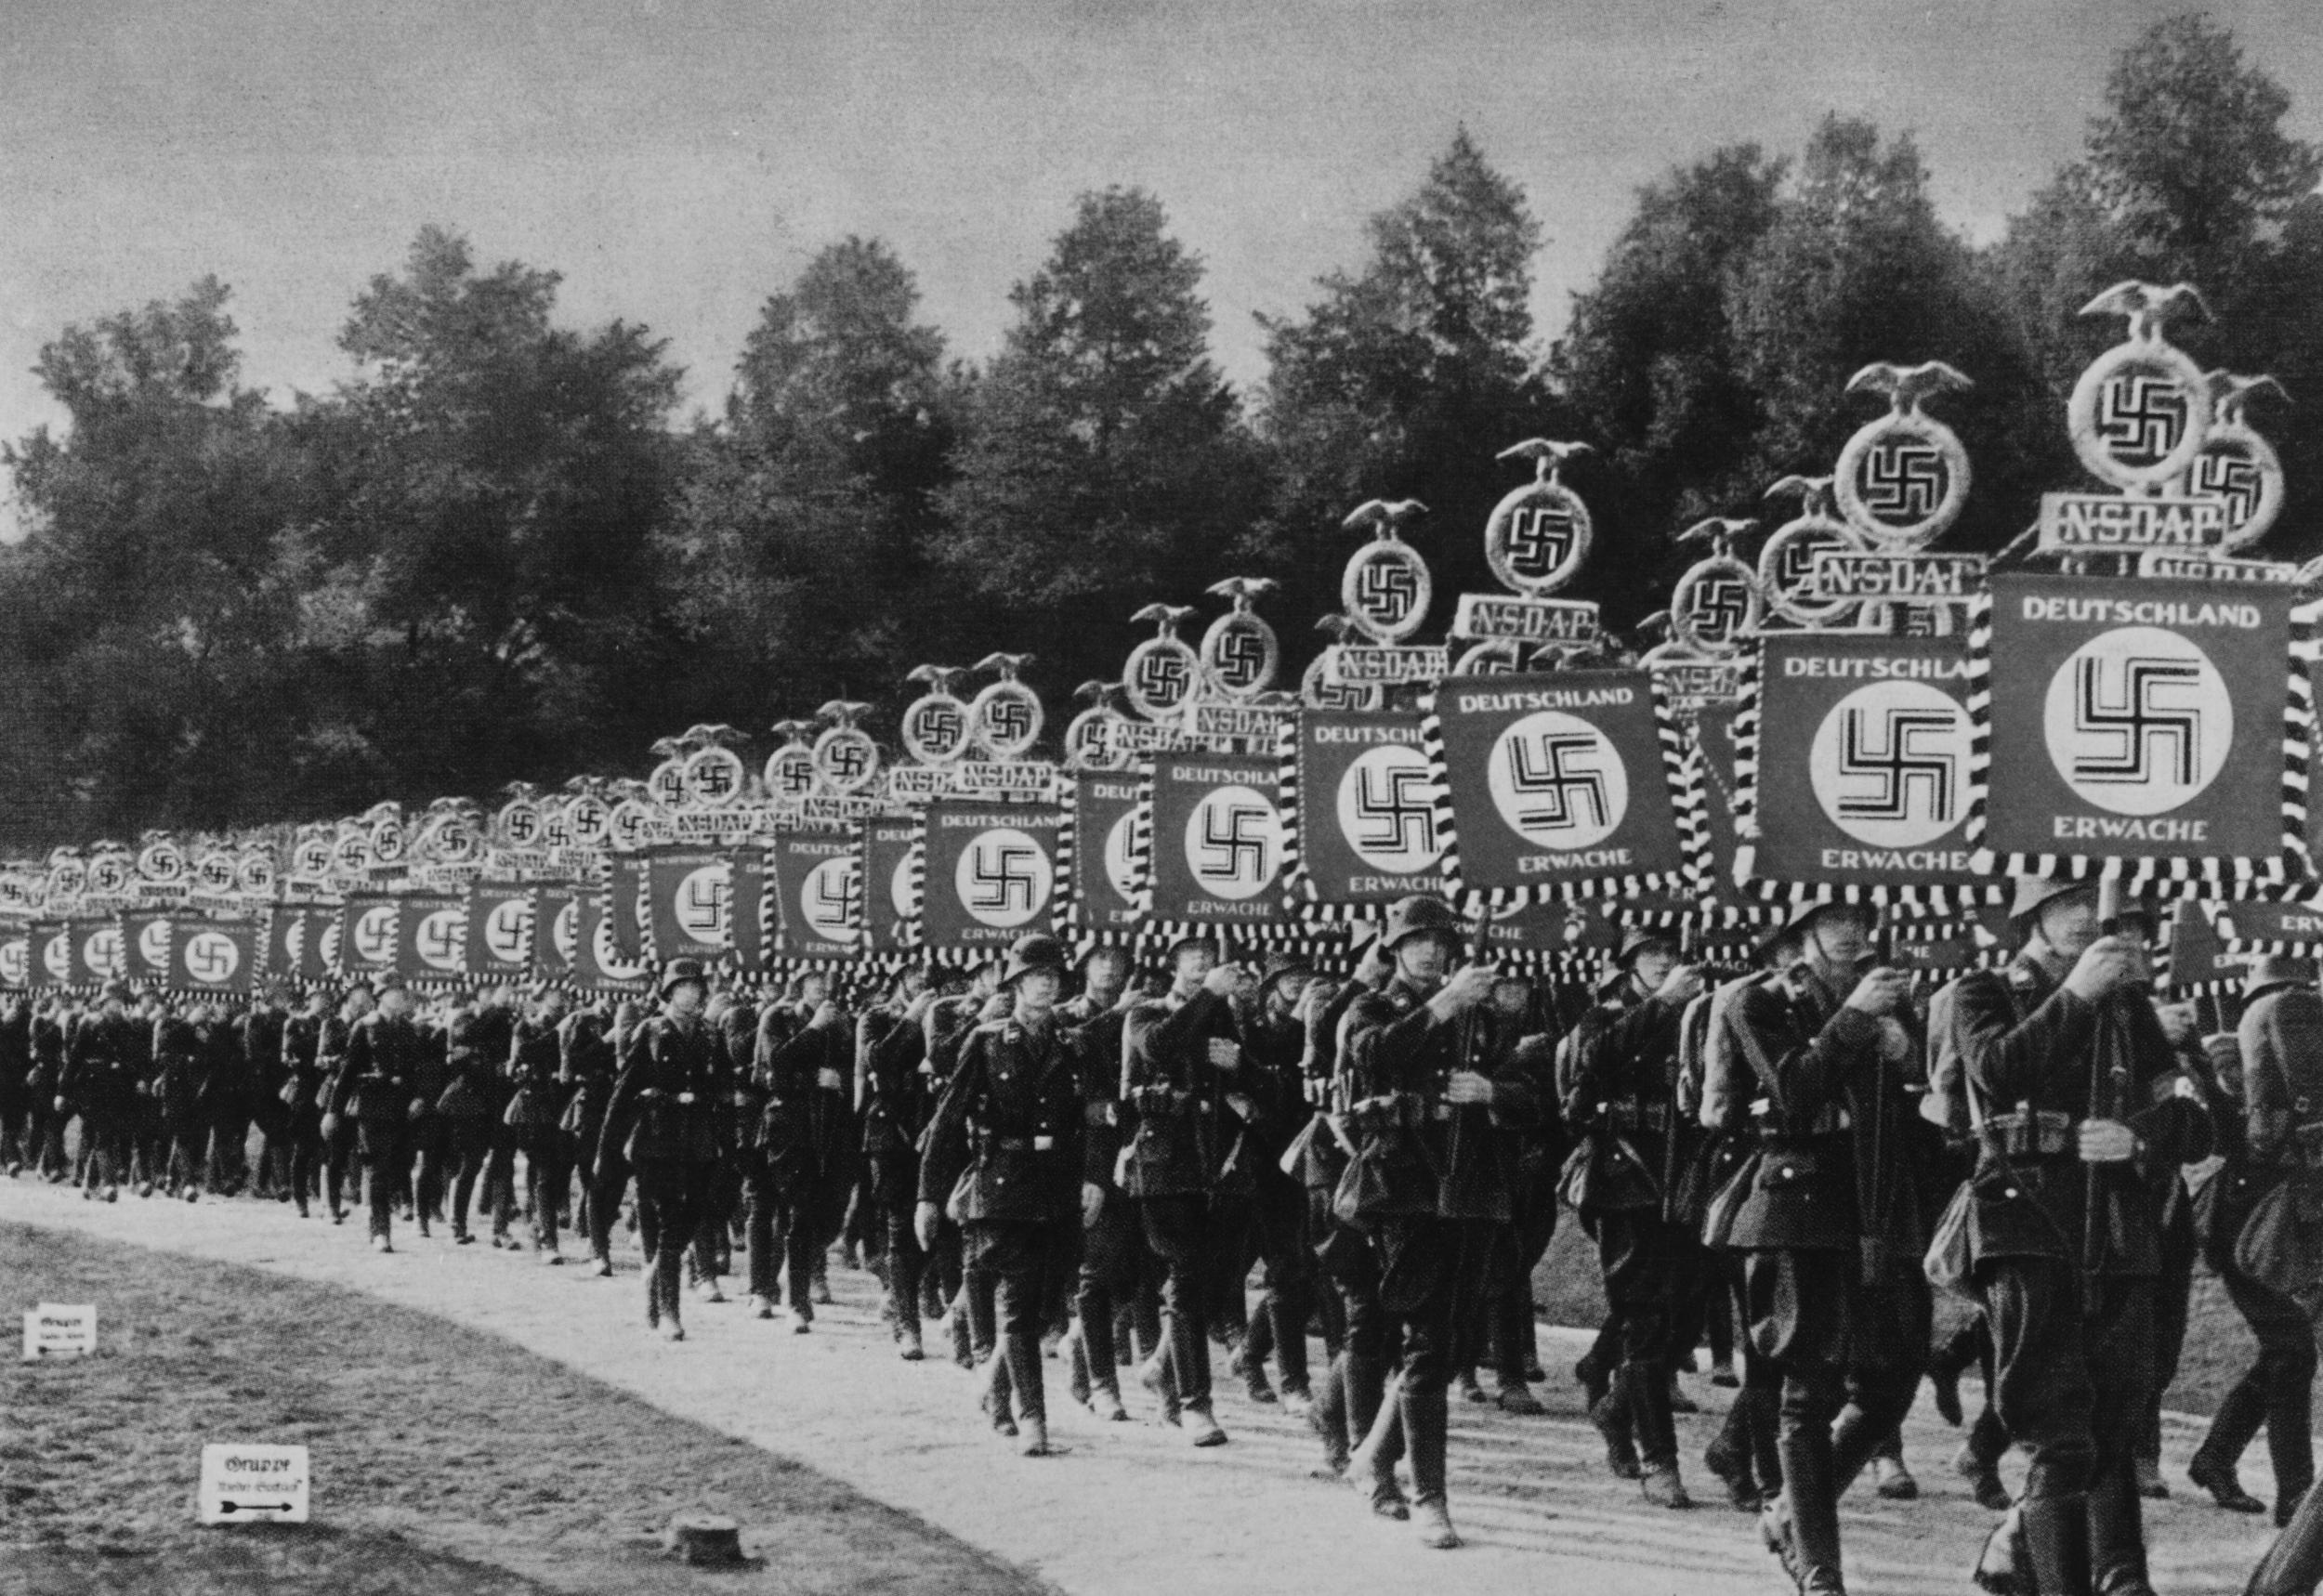 Neo-Nazis filmed marching with torches at Hitler's Nuremberg rally ...